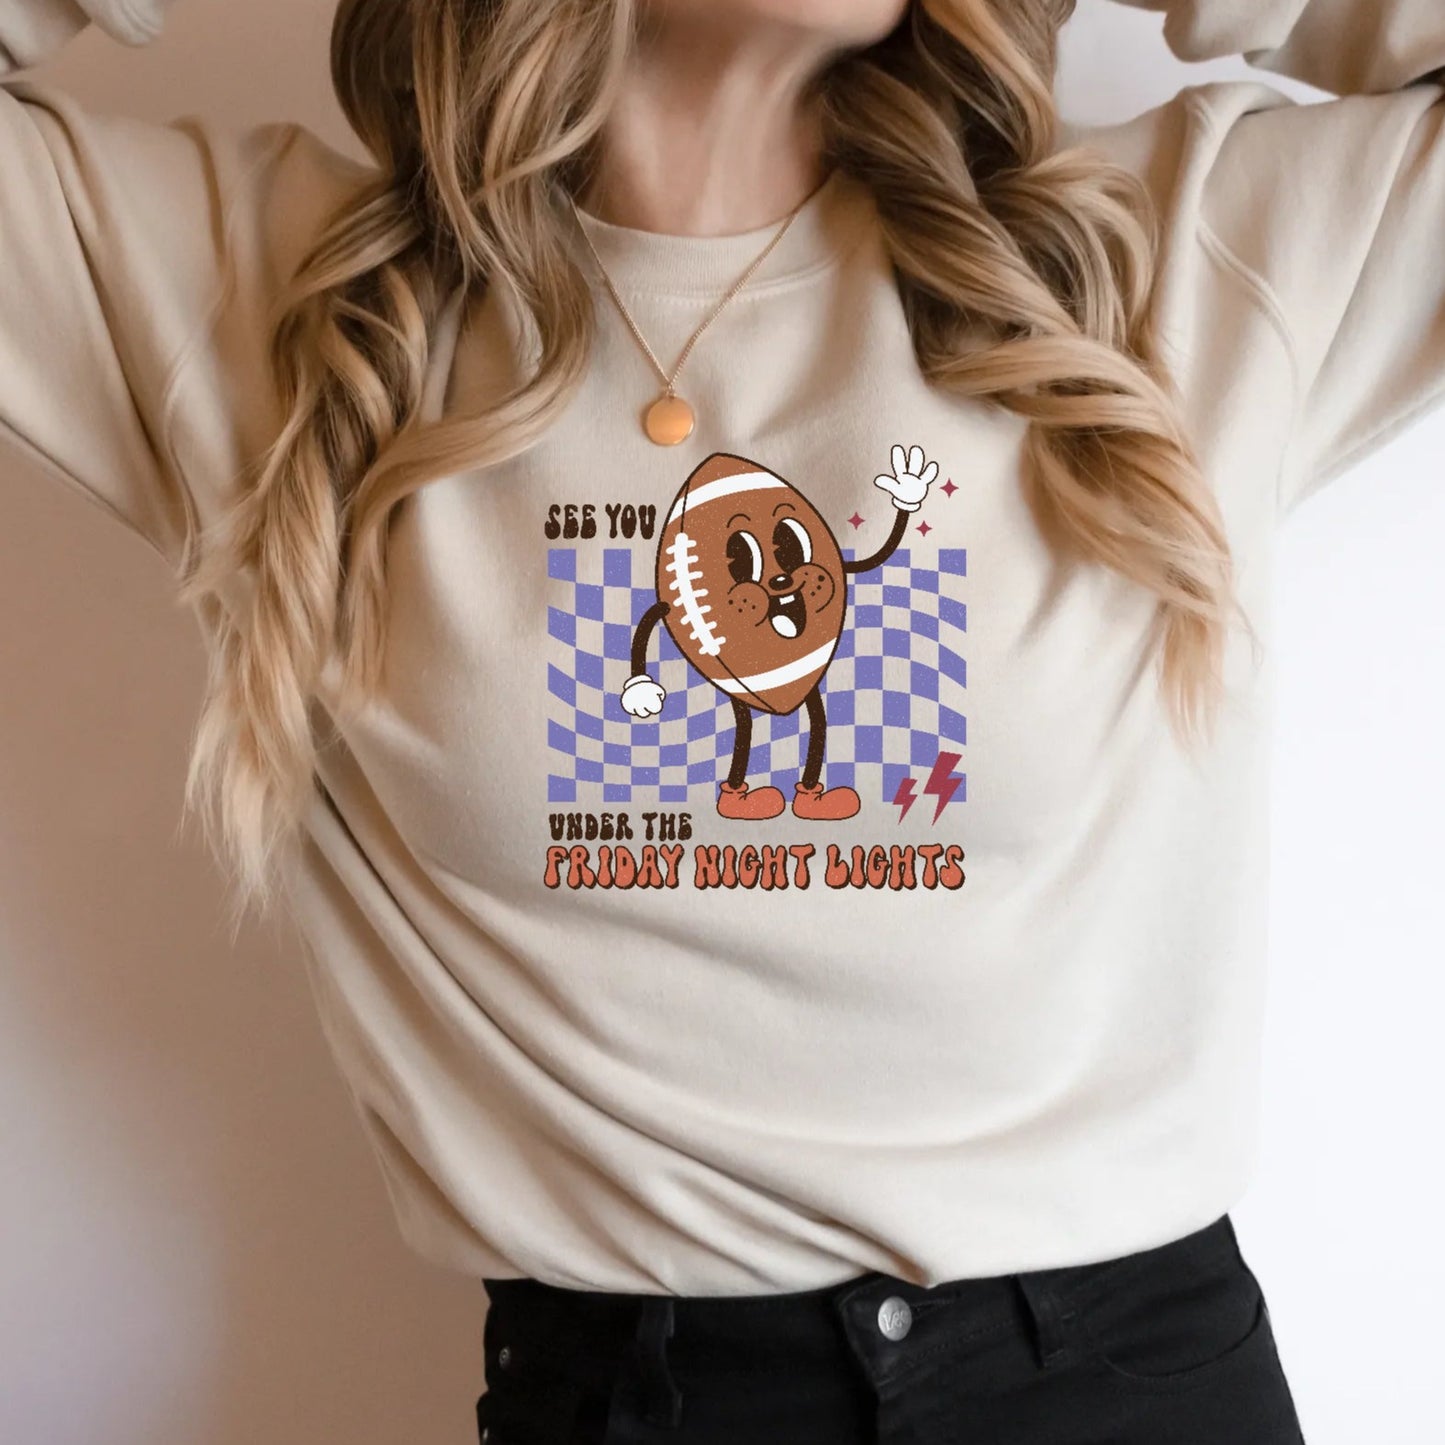 Retro Womens Sweatshirt for Fall Football See You Under The Friday Night Lights